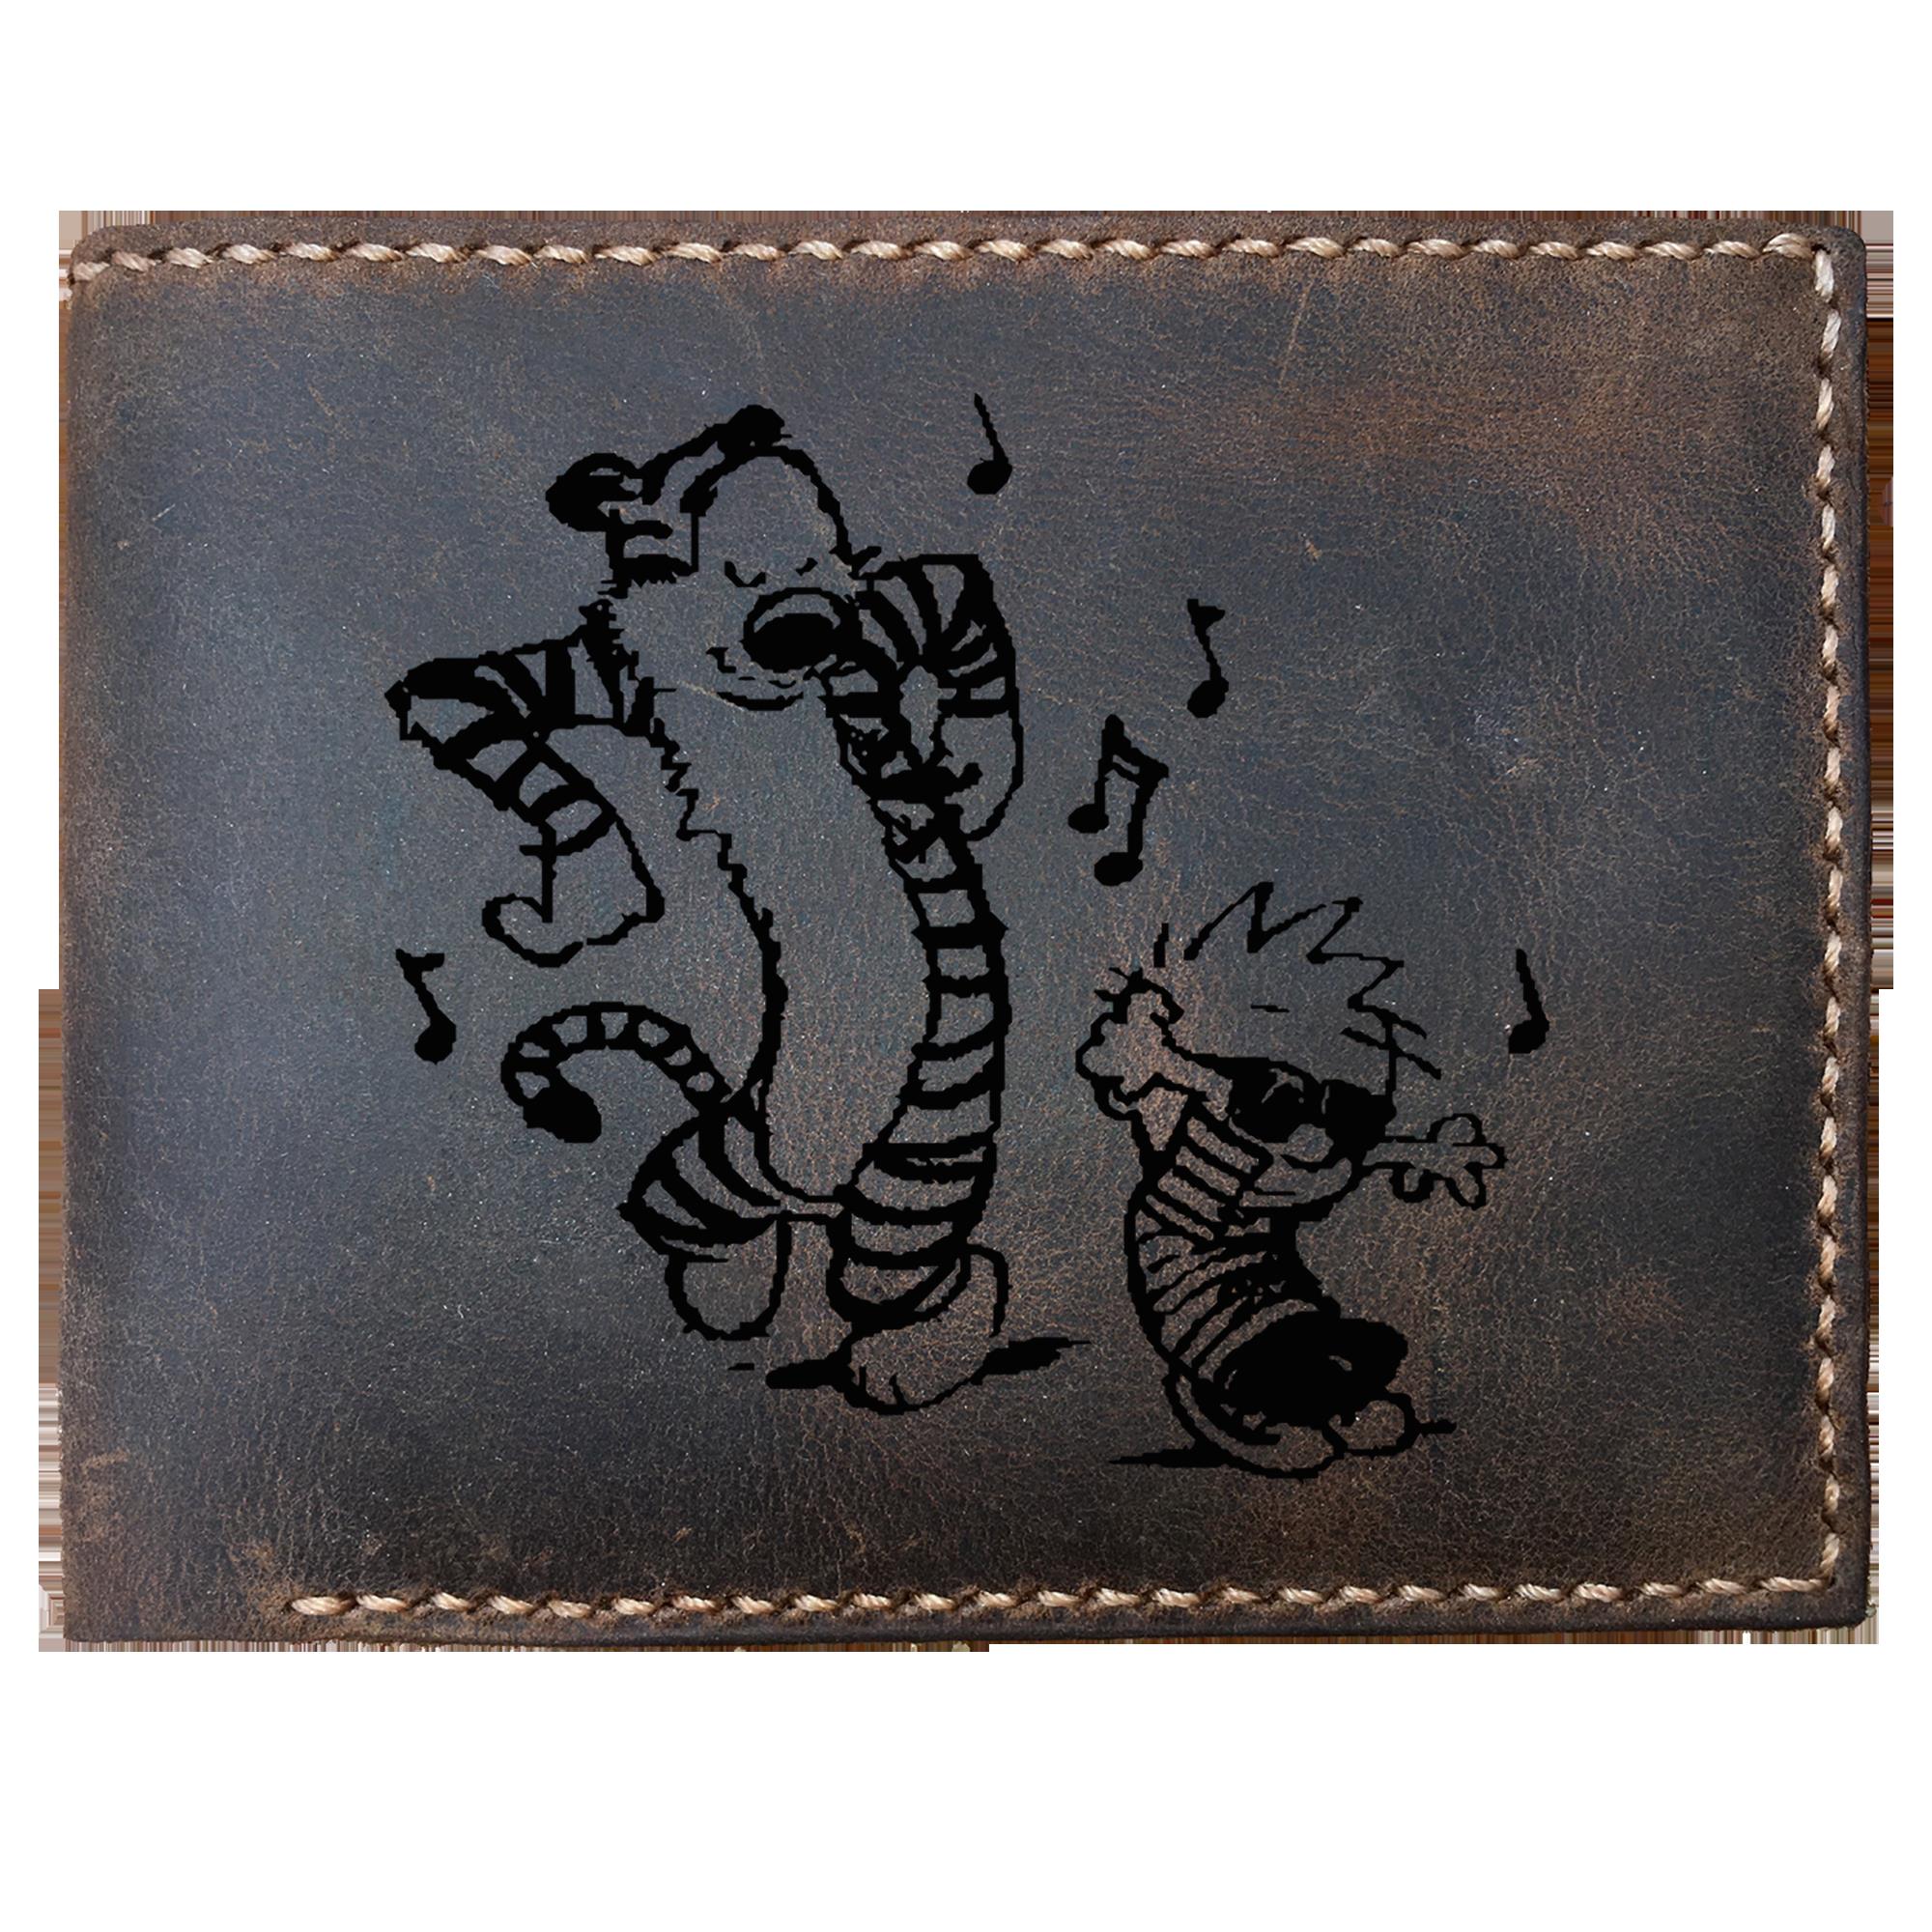 Skitongifts Funny Custom Laser Engraved Bifold Leather Wallet For Men, Playing Dance